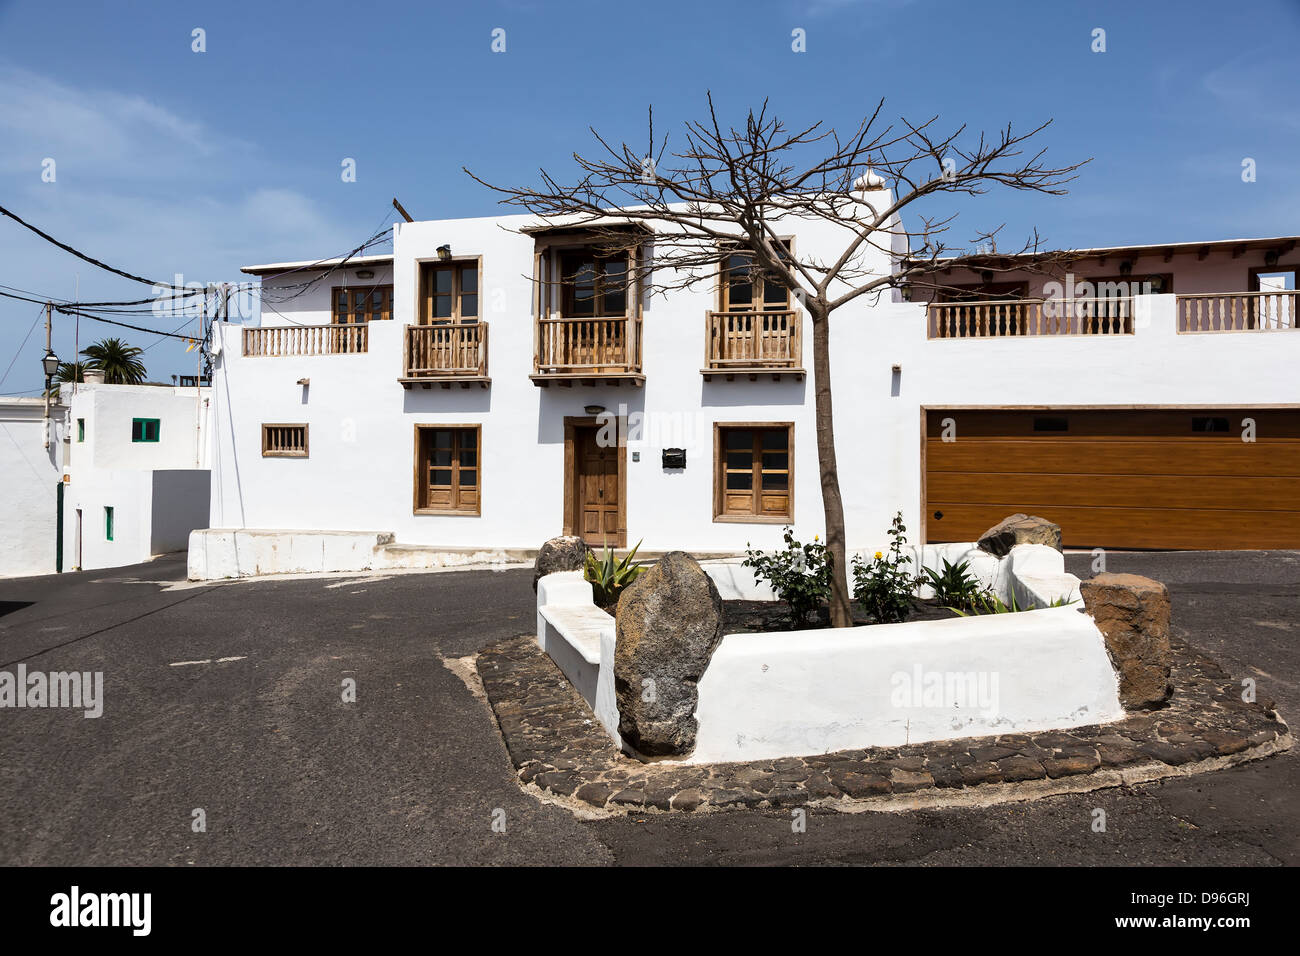 Canarian balconies on house in Haria town, Lanzarote, Canary Islands, Spain Stock Photo